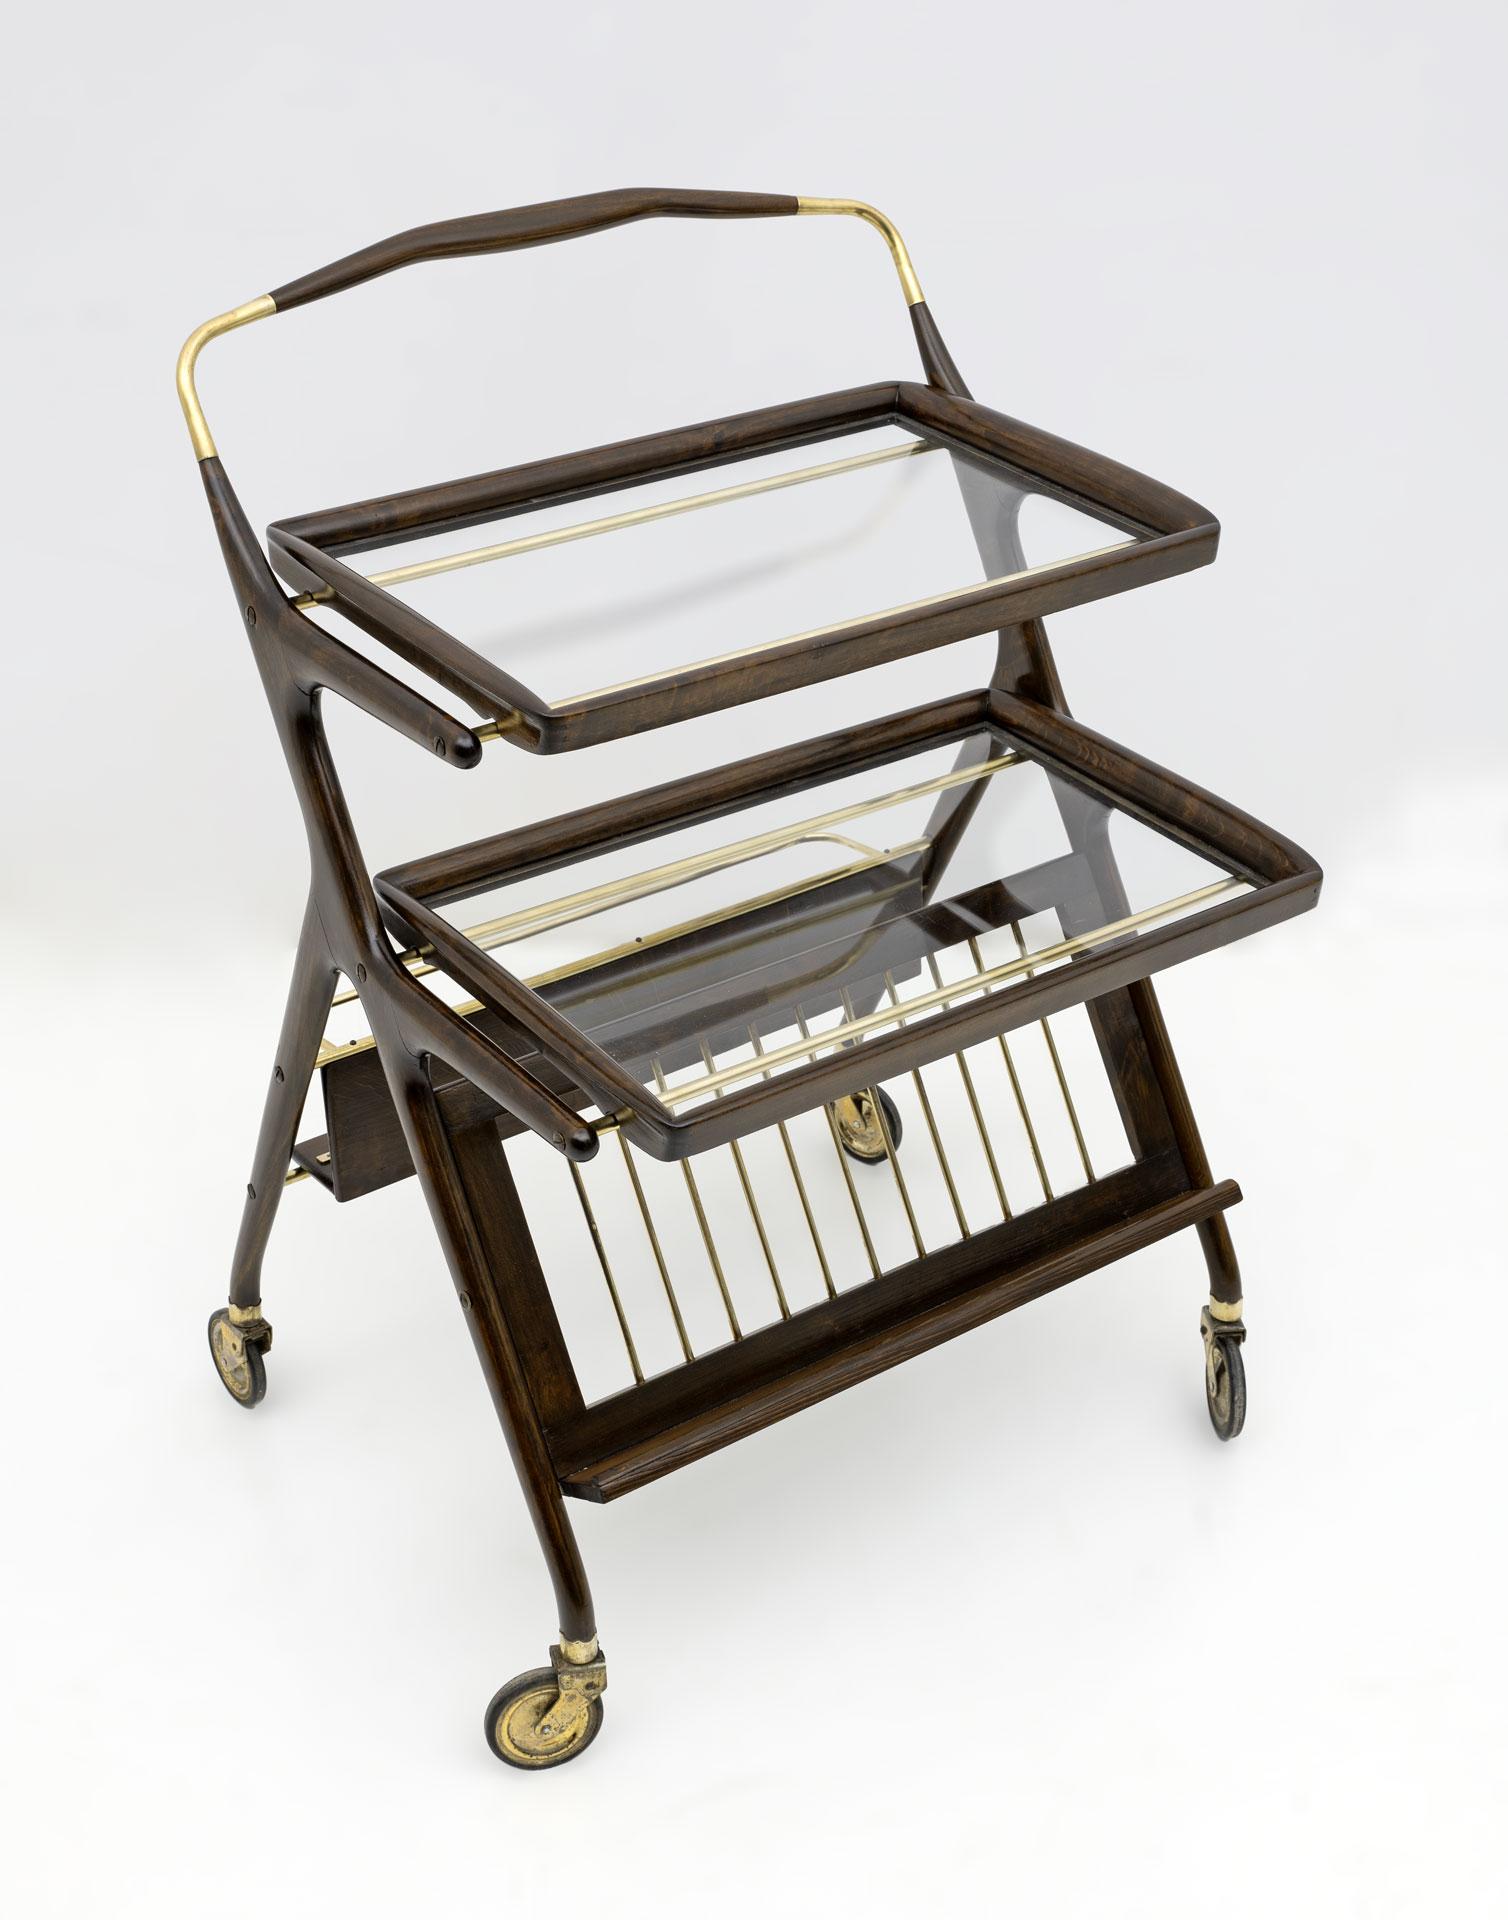 Cesare Lacca Mid-Century Modern Italian Walnut and Brass Bar Cart by Cassina 50s (Messing) im Angebot